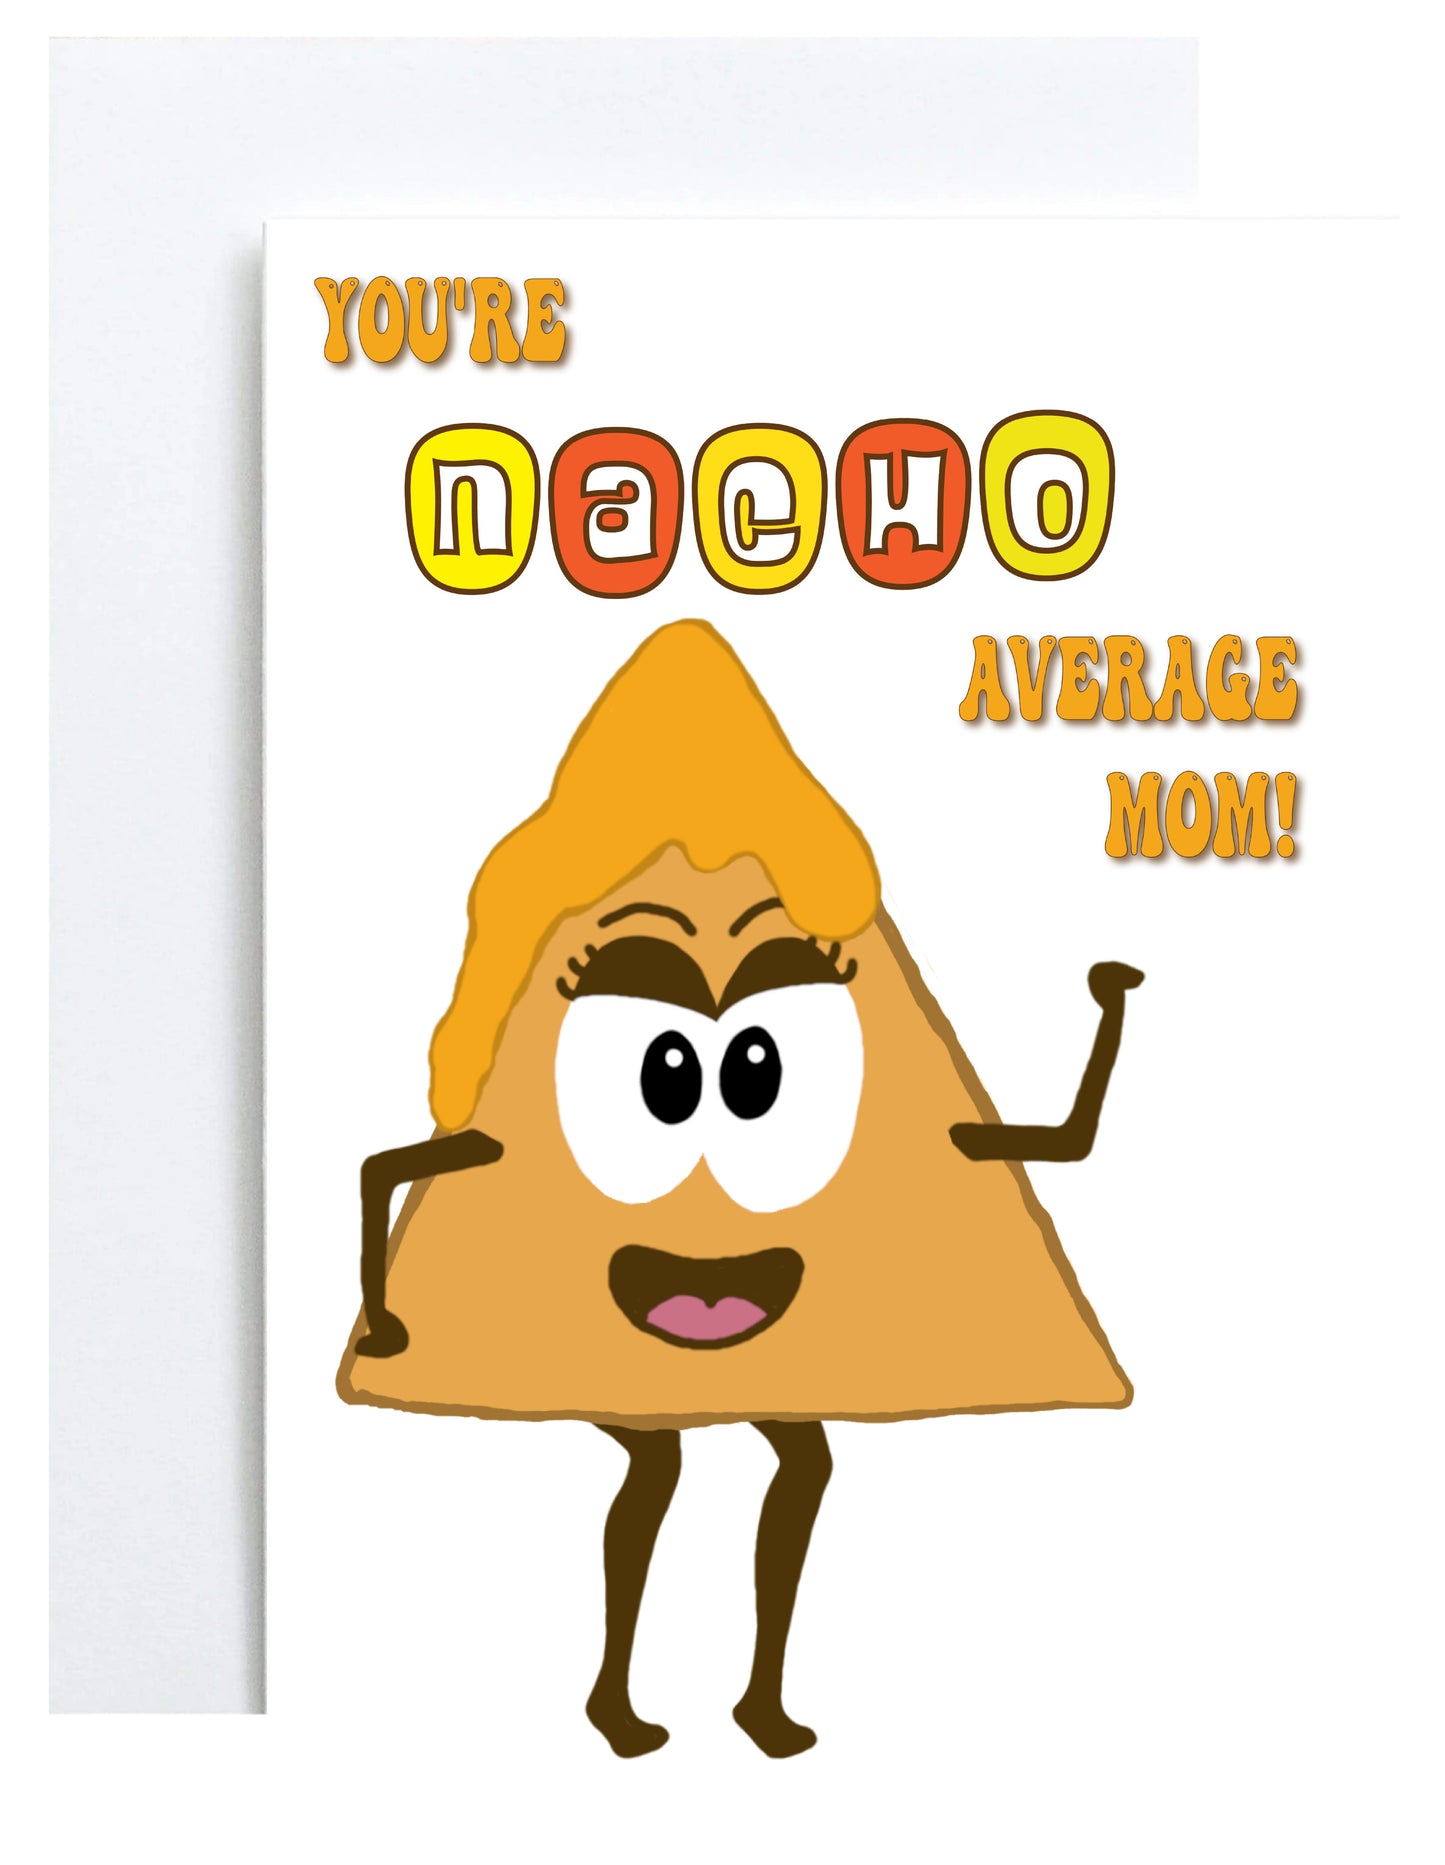 "Nacho Average Mom" Greeting Card (Mother's Day)